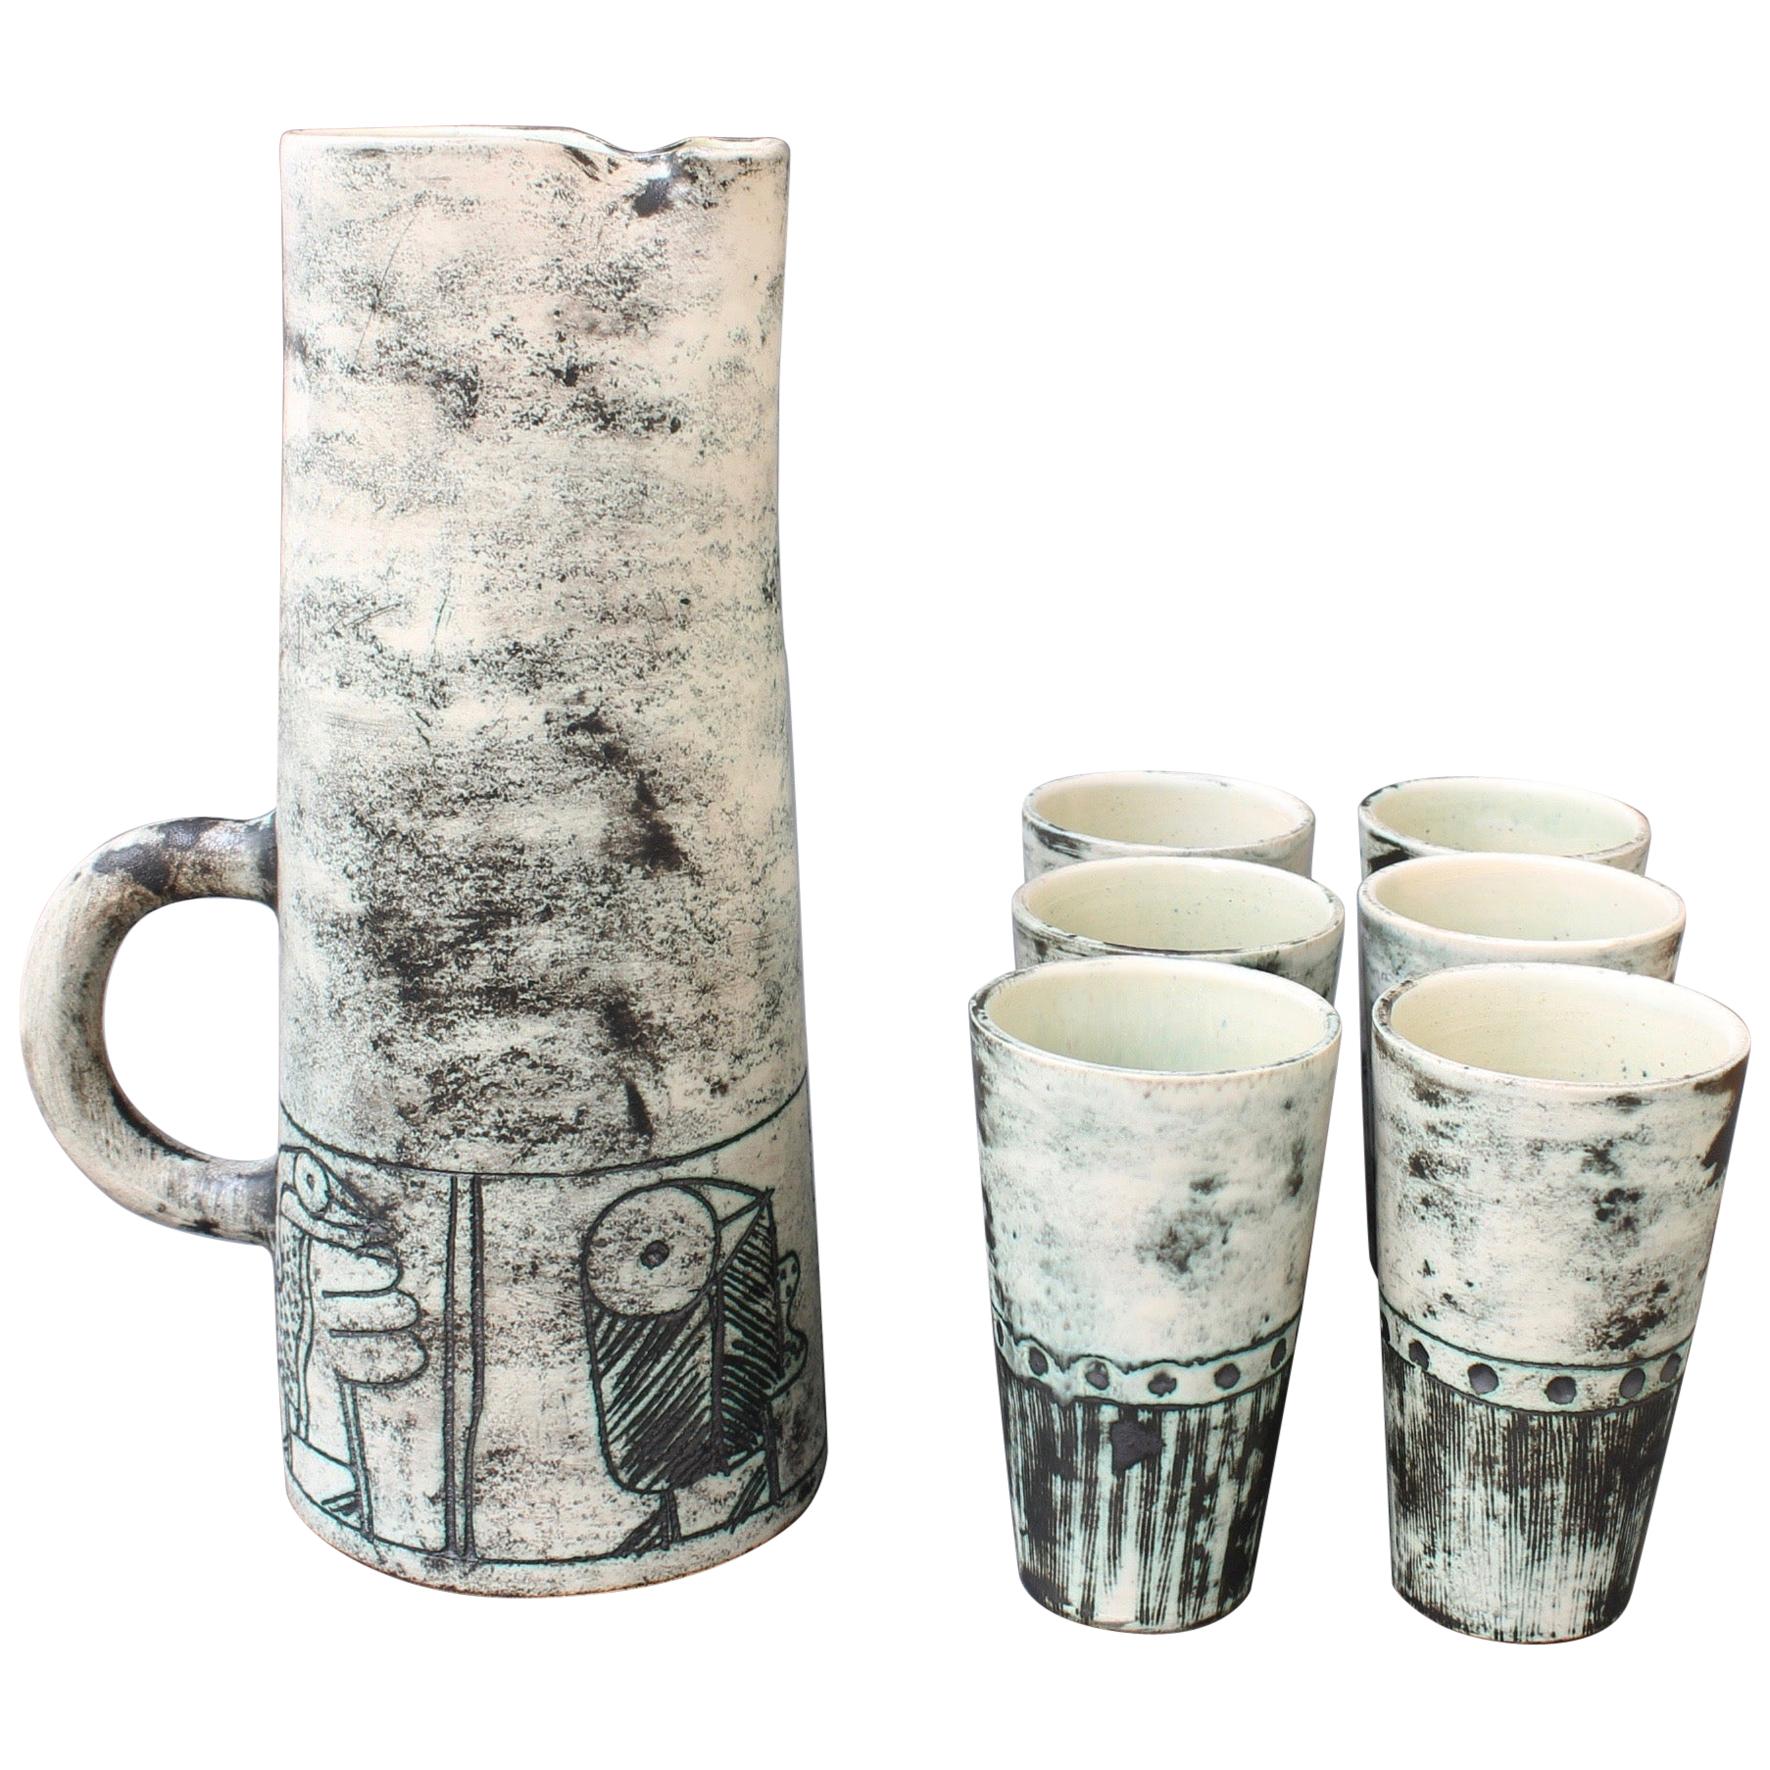 Ceramic Pitcher and 6-Cup Set by Jacques Blin, circa 1950s